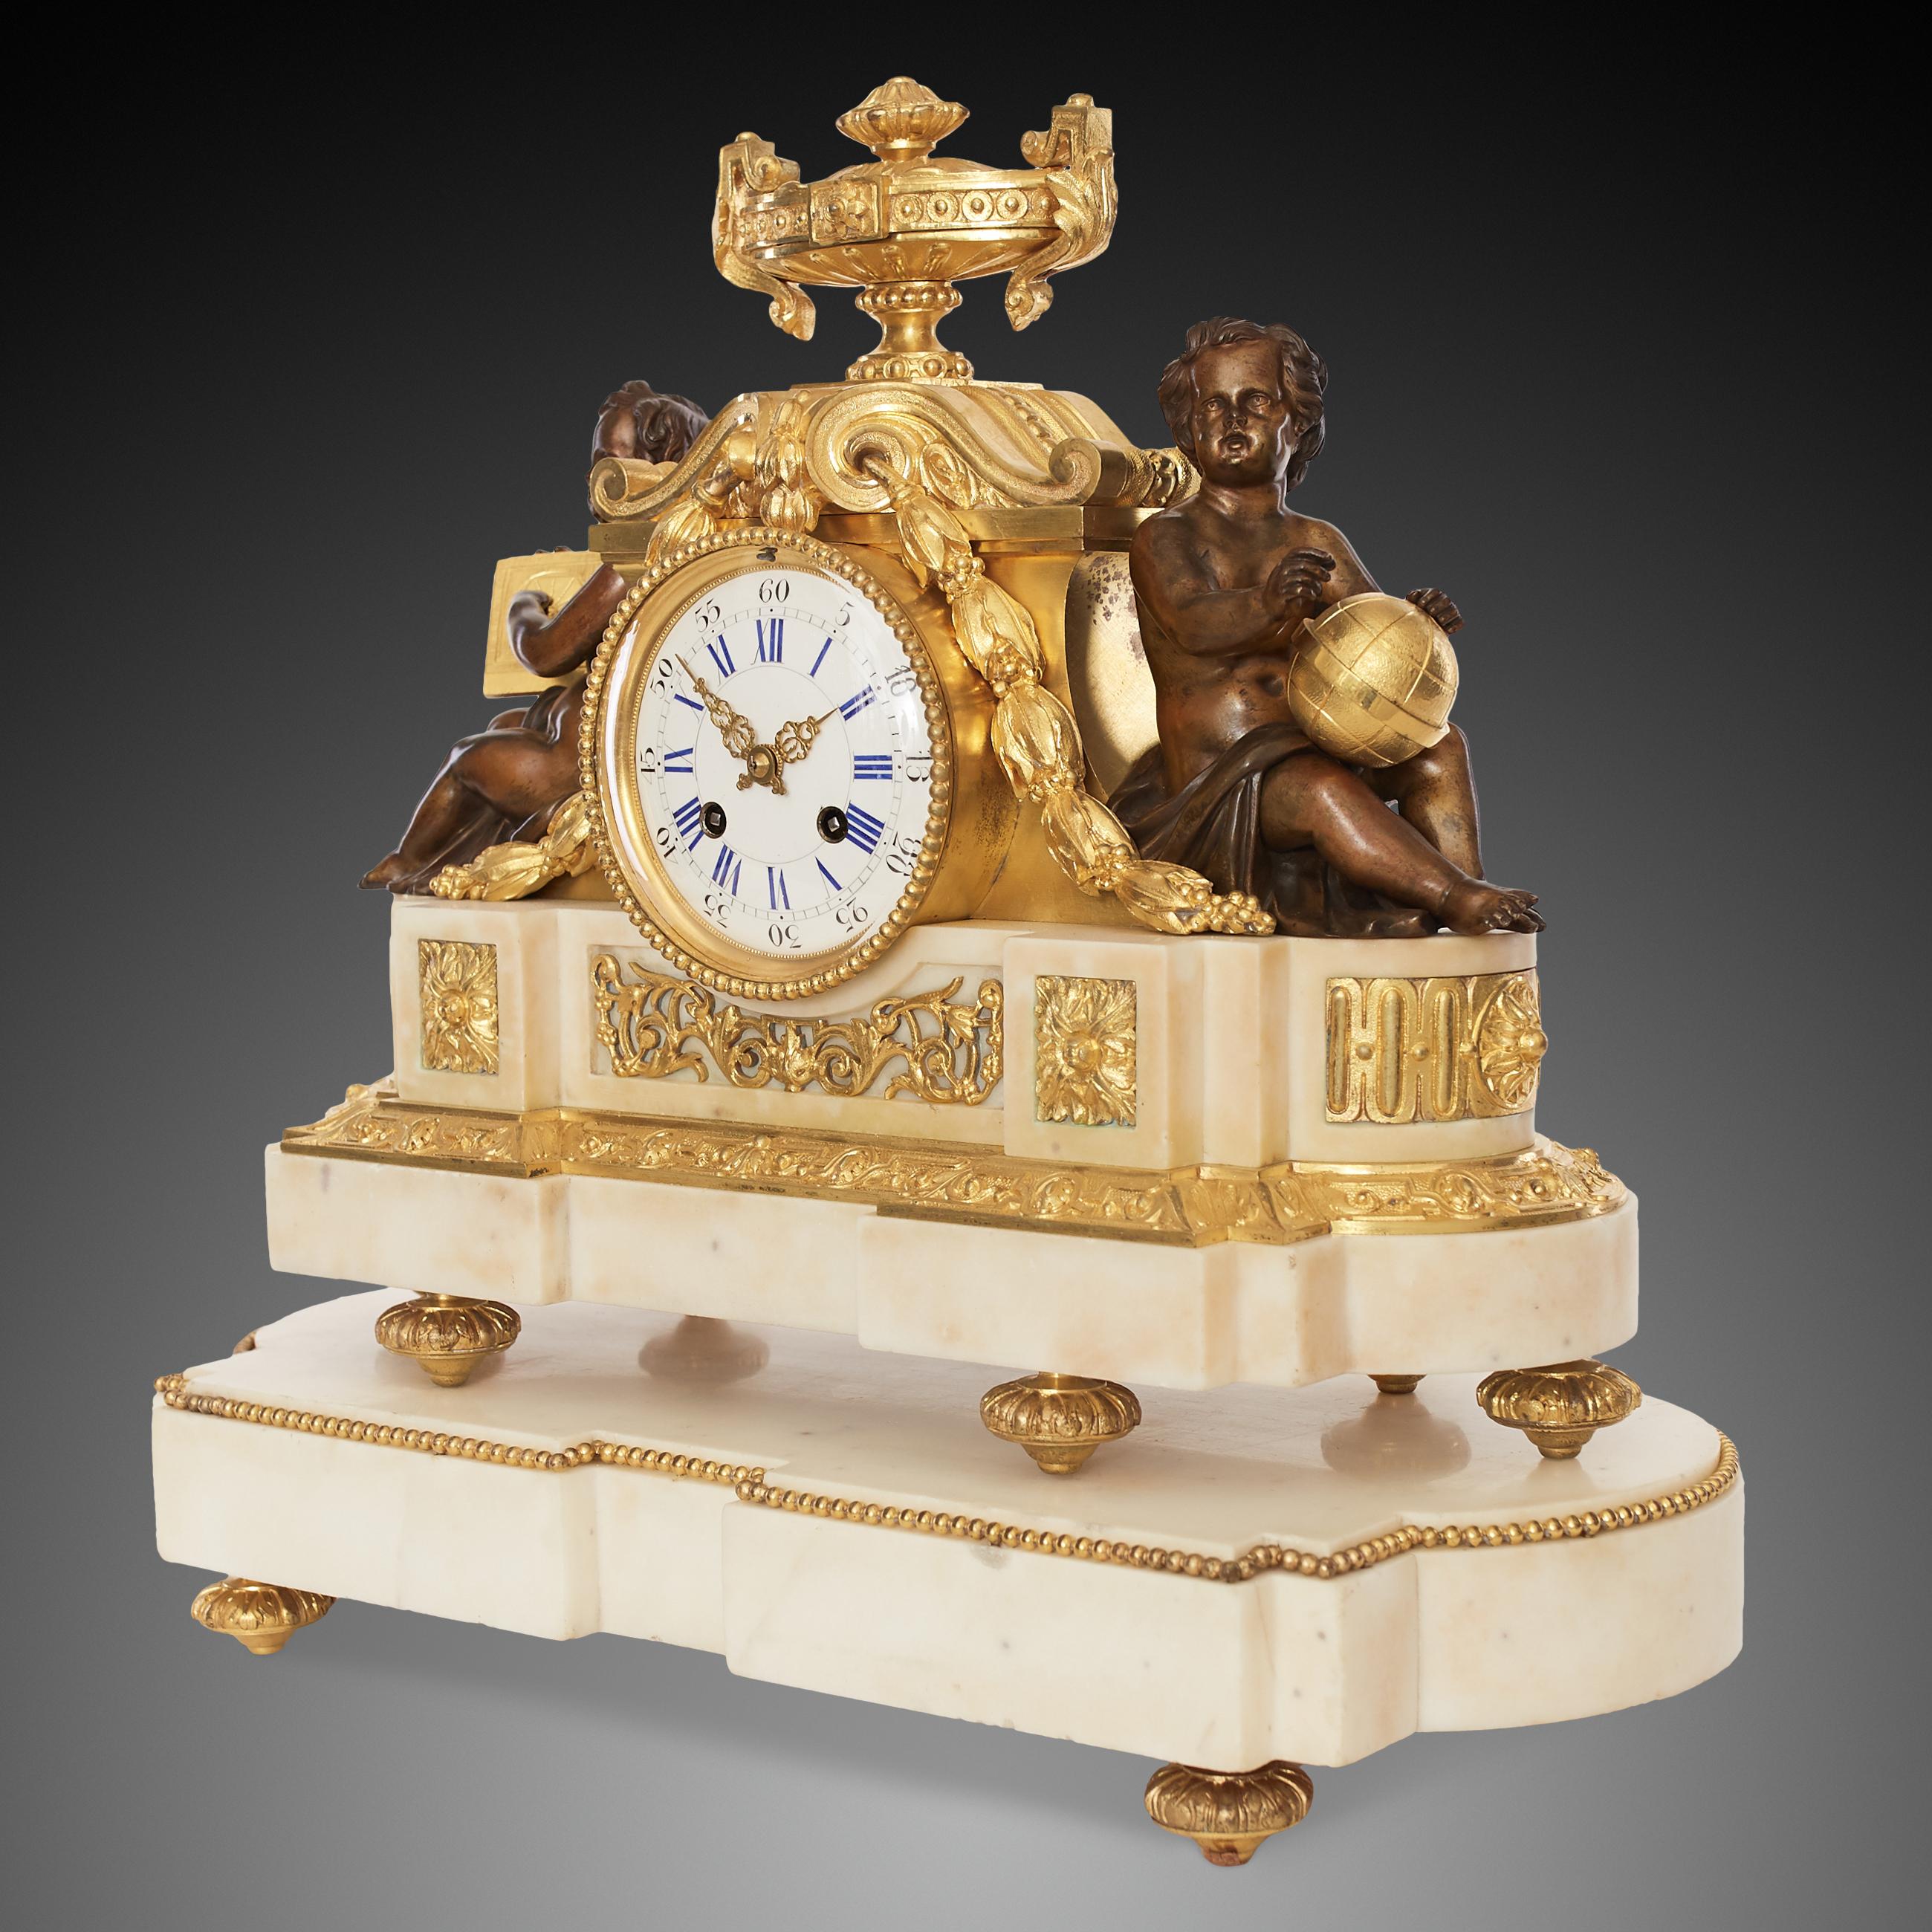 In contrast to the preceding style which was the Rococo, the Louis XVI style shows growing importance for individual parts of the whole, clarity, and harmony where hard edges and corners are avoided. Often bronze and white marble are used in